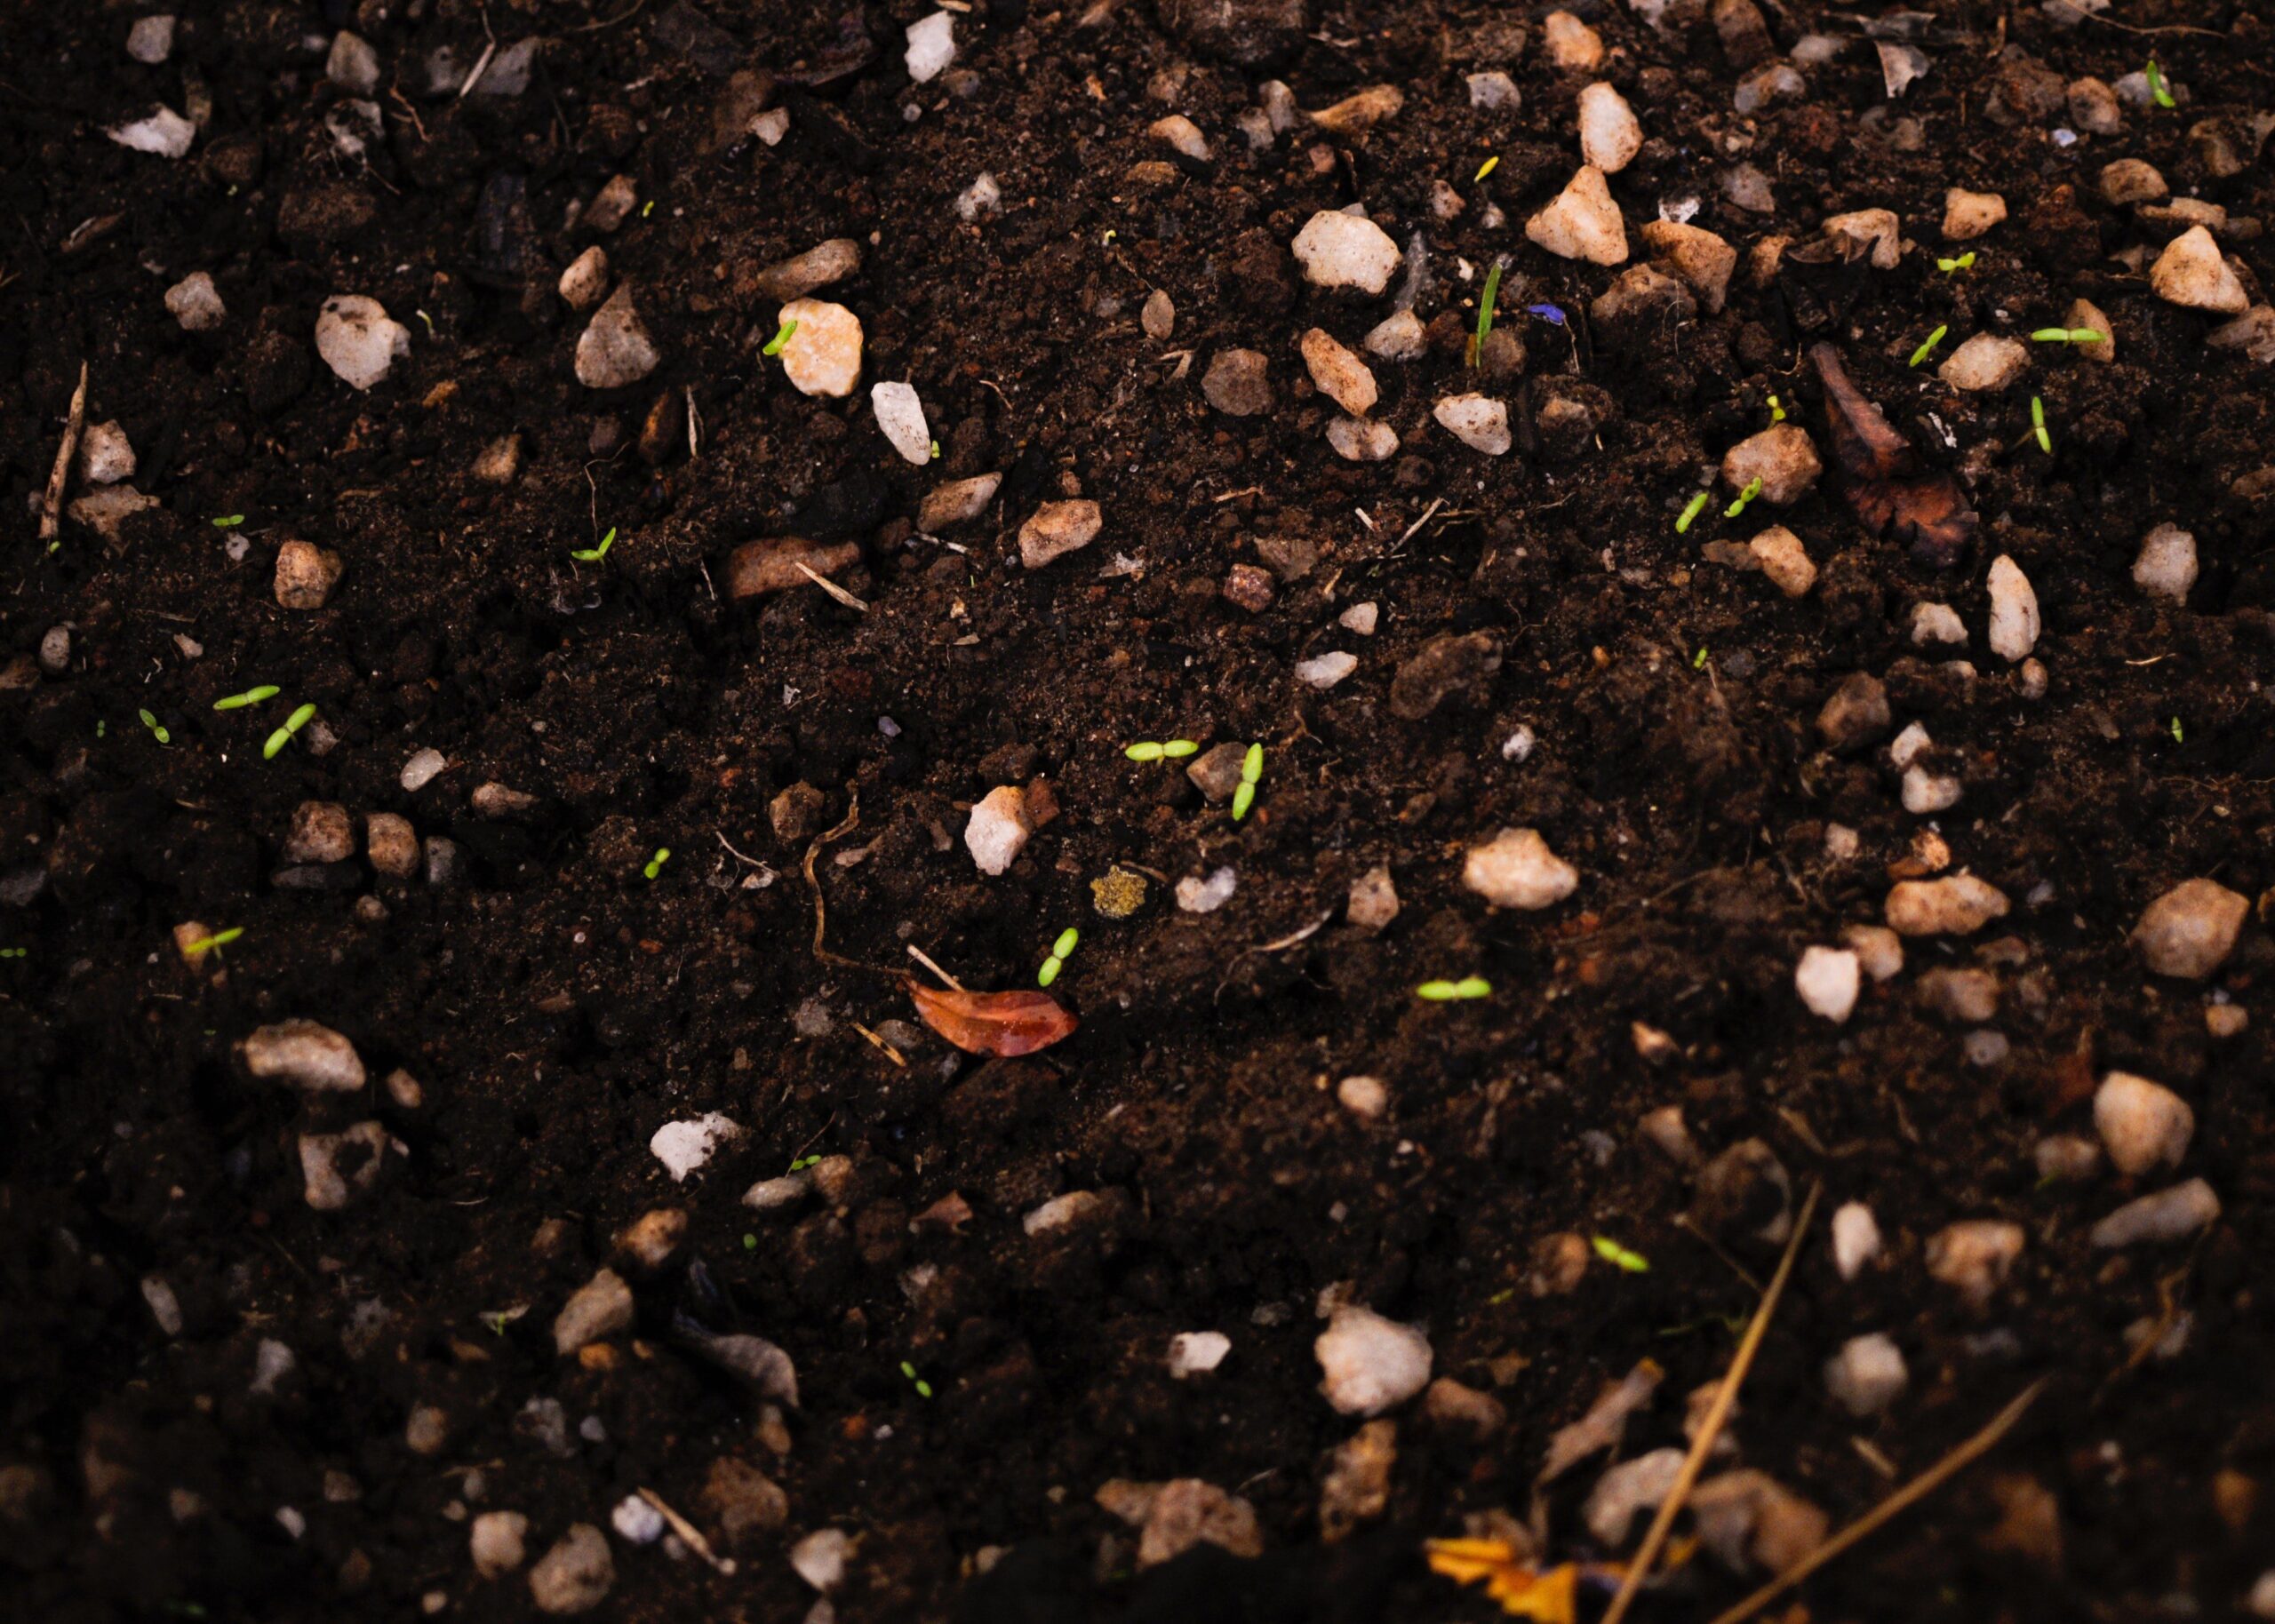 Sprouted plants emerging from soil